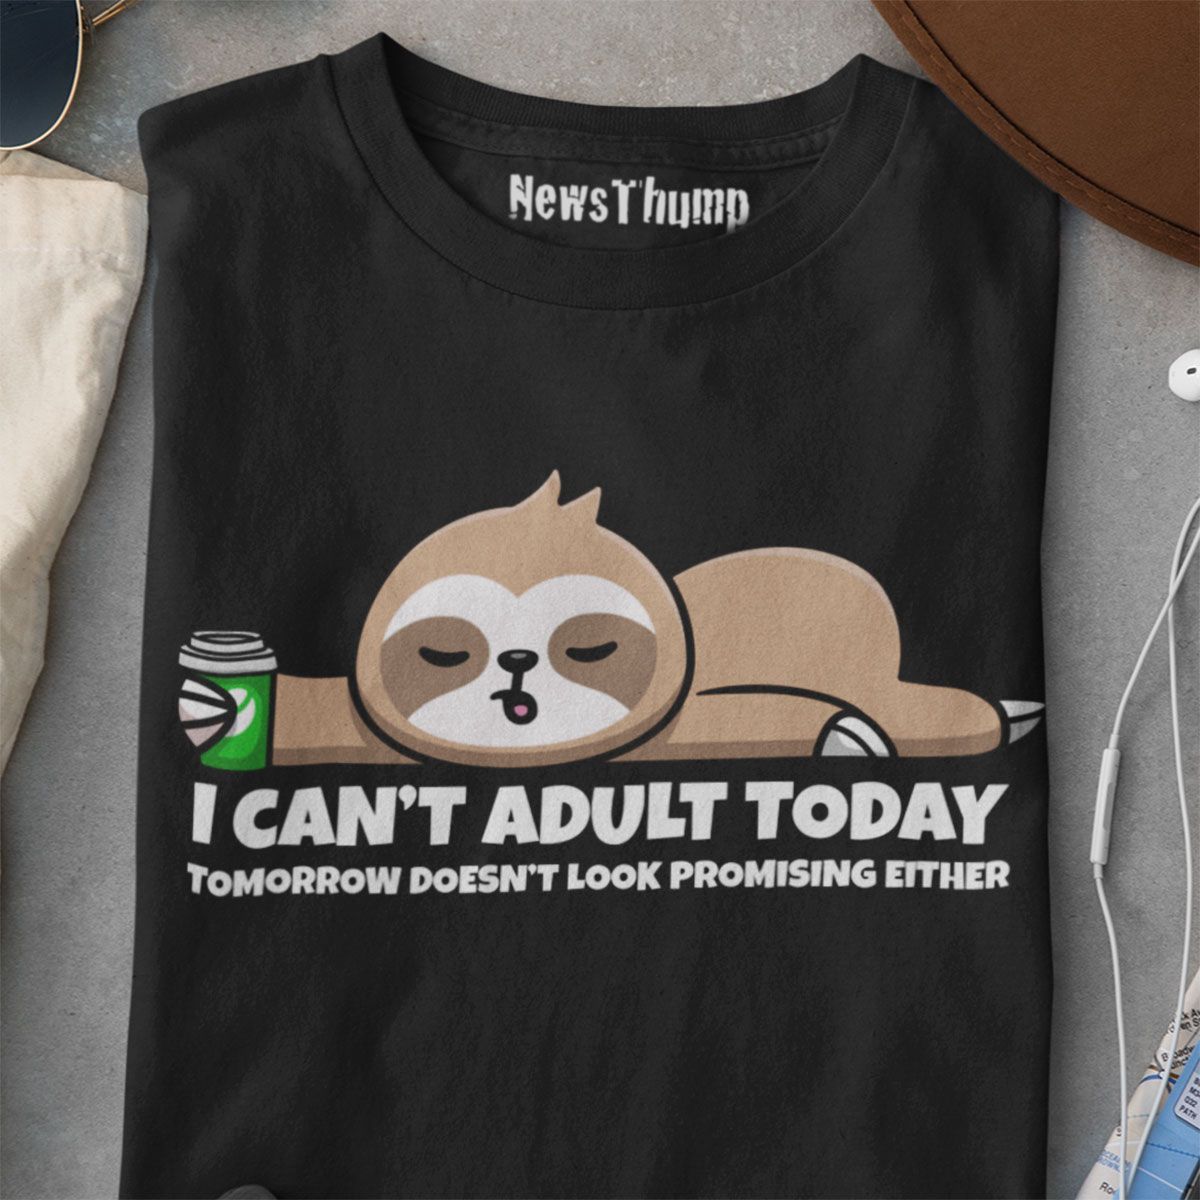 I can't adult today (tomorrow doesn't look promising either) Get yours HERE >>> buff.ly/3JE4h8x